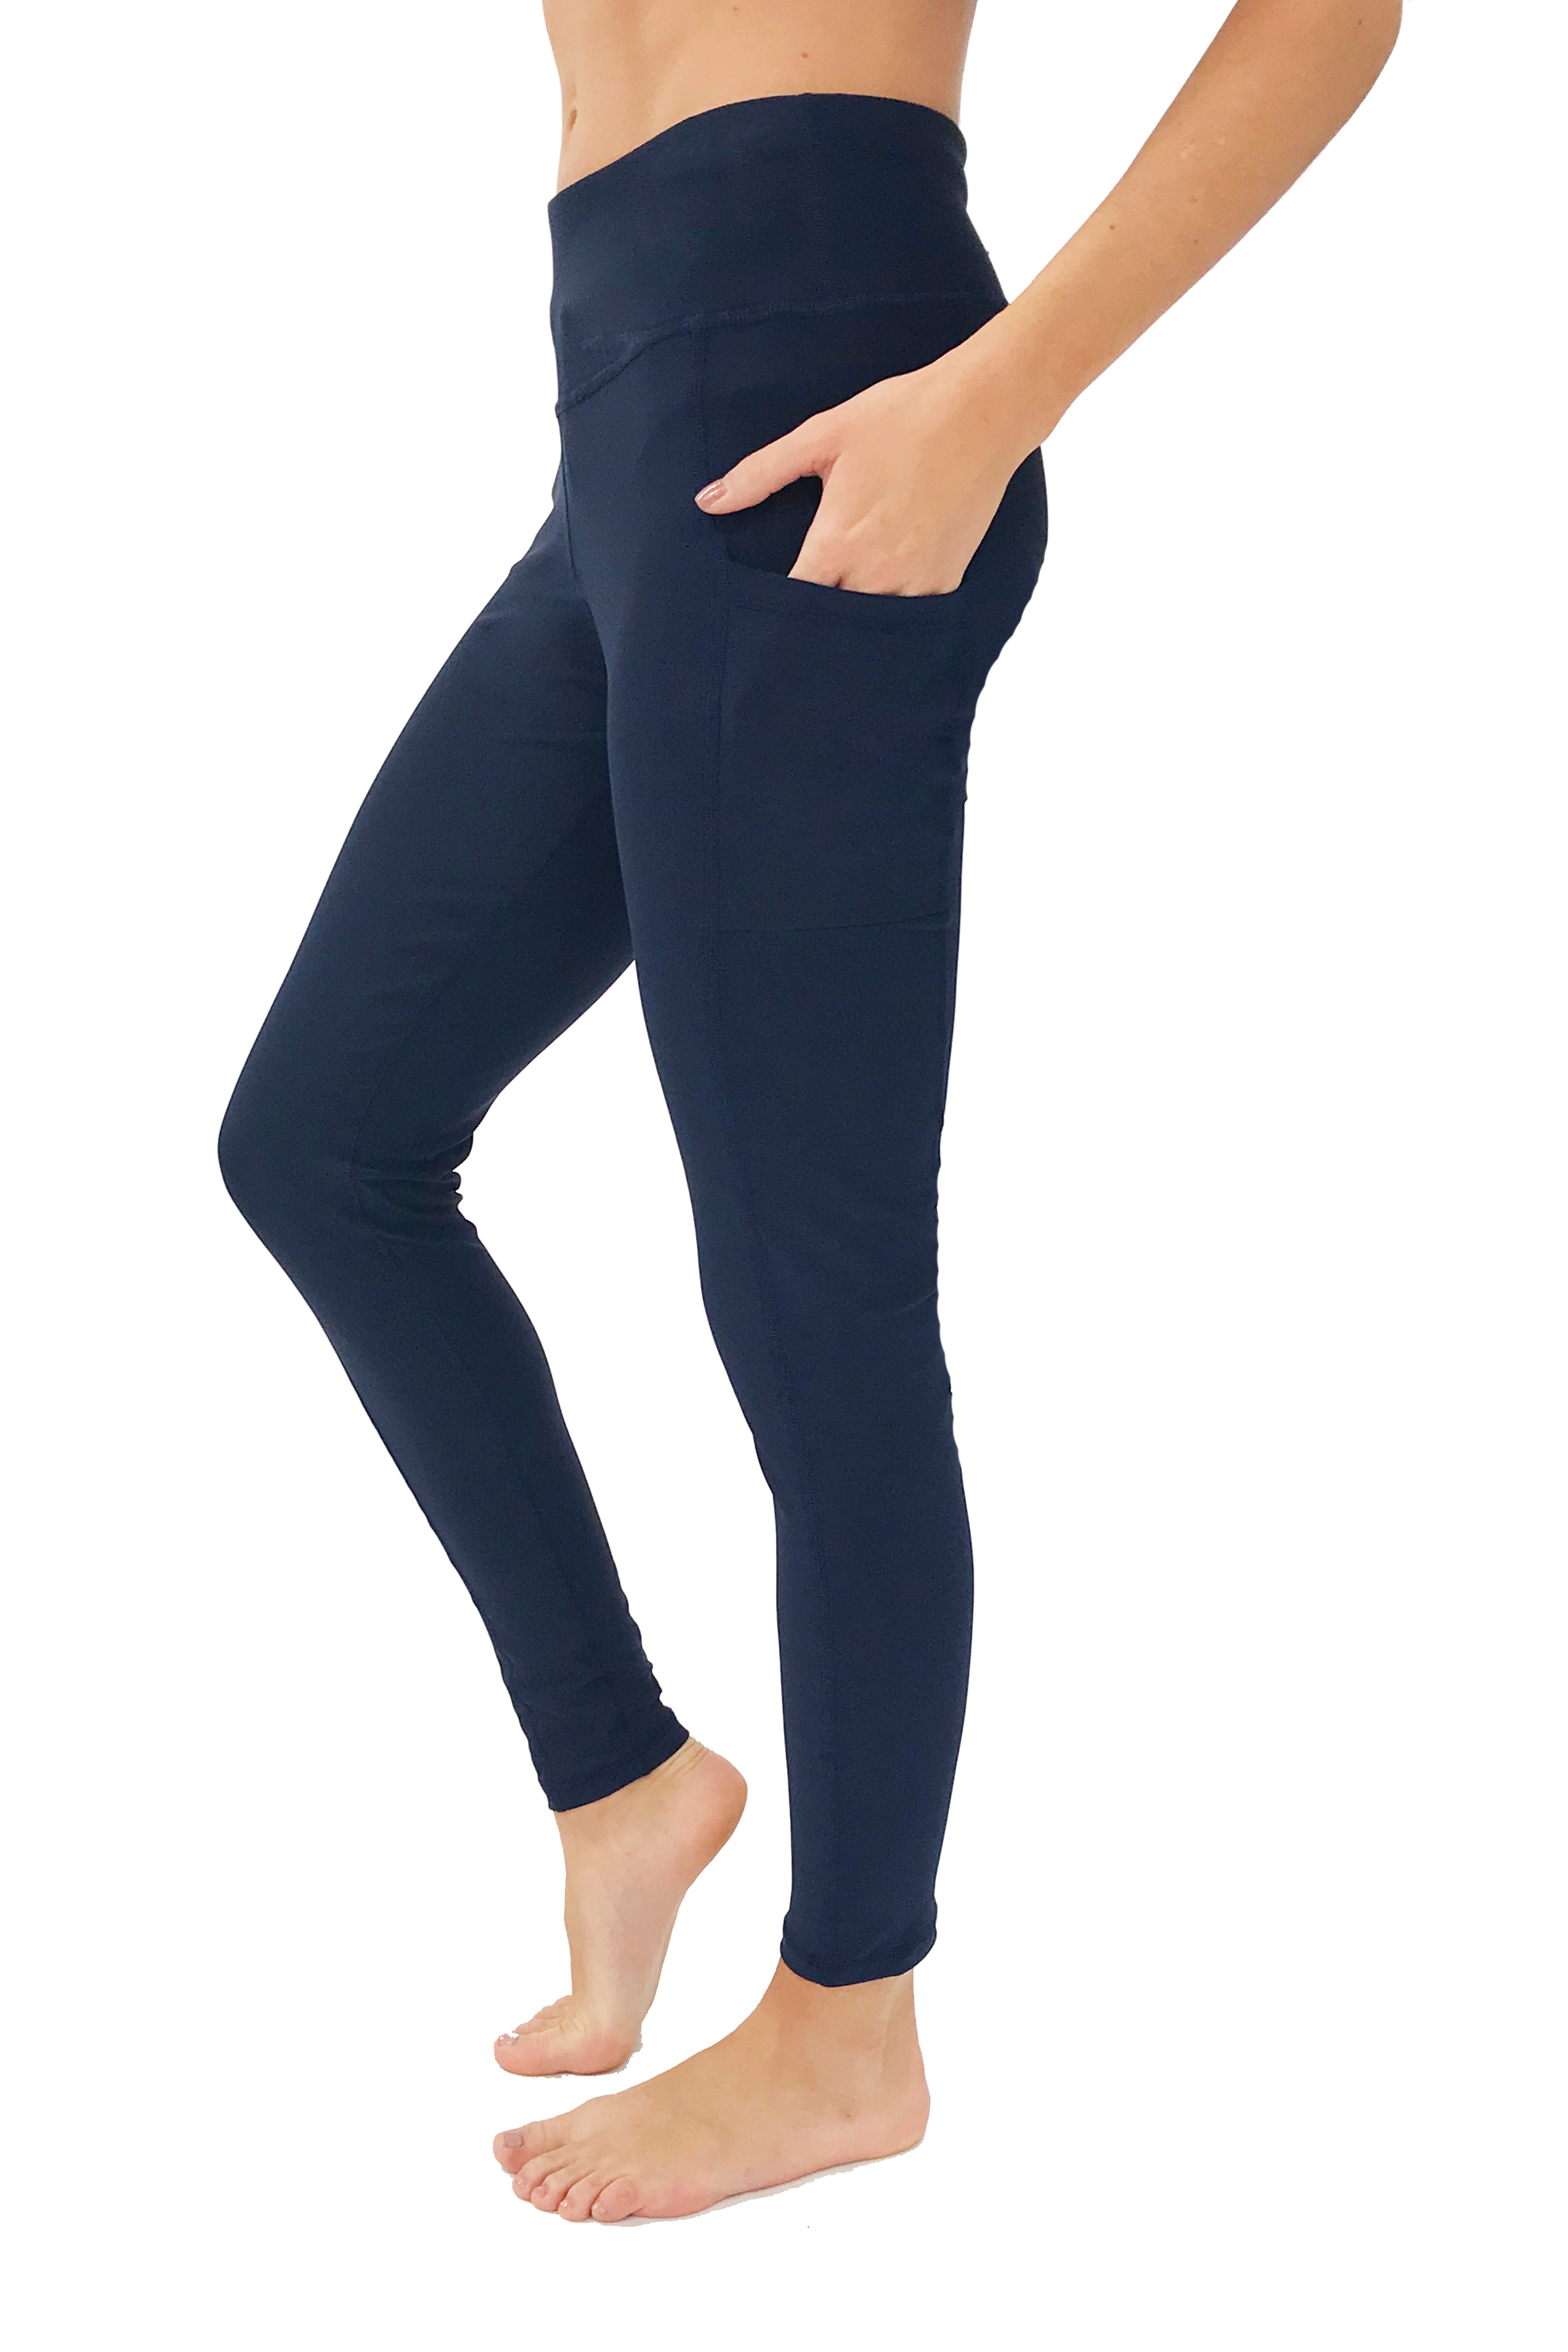 4103 - The Victory Cell Phone Pocket Legging/Navy